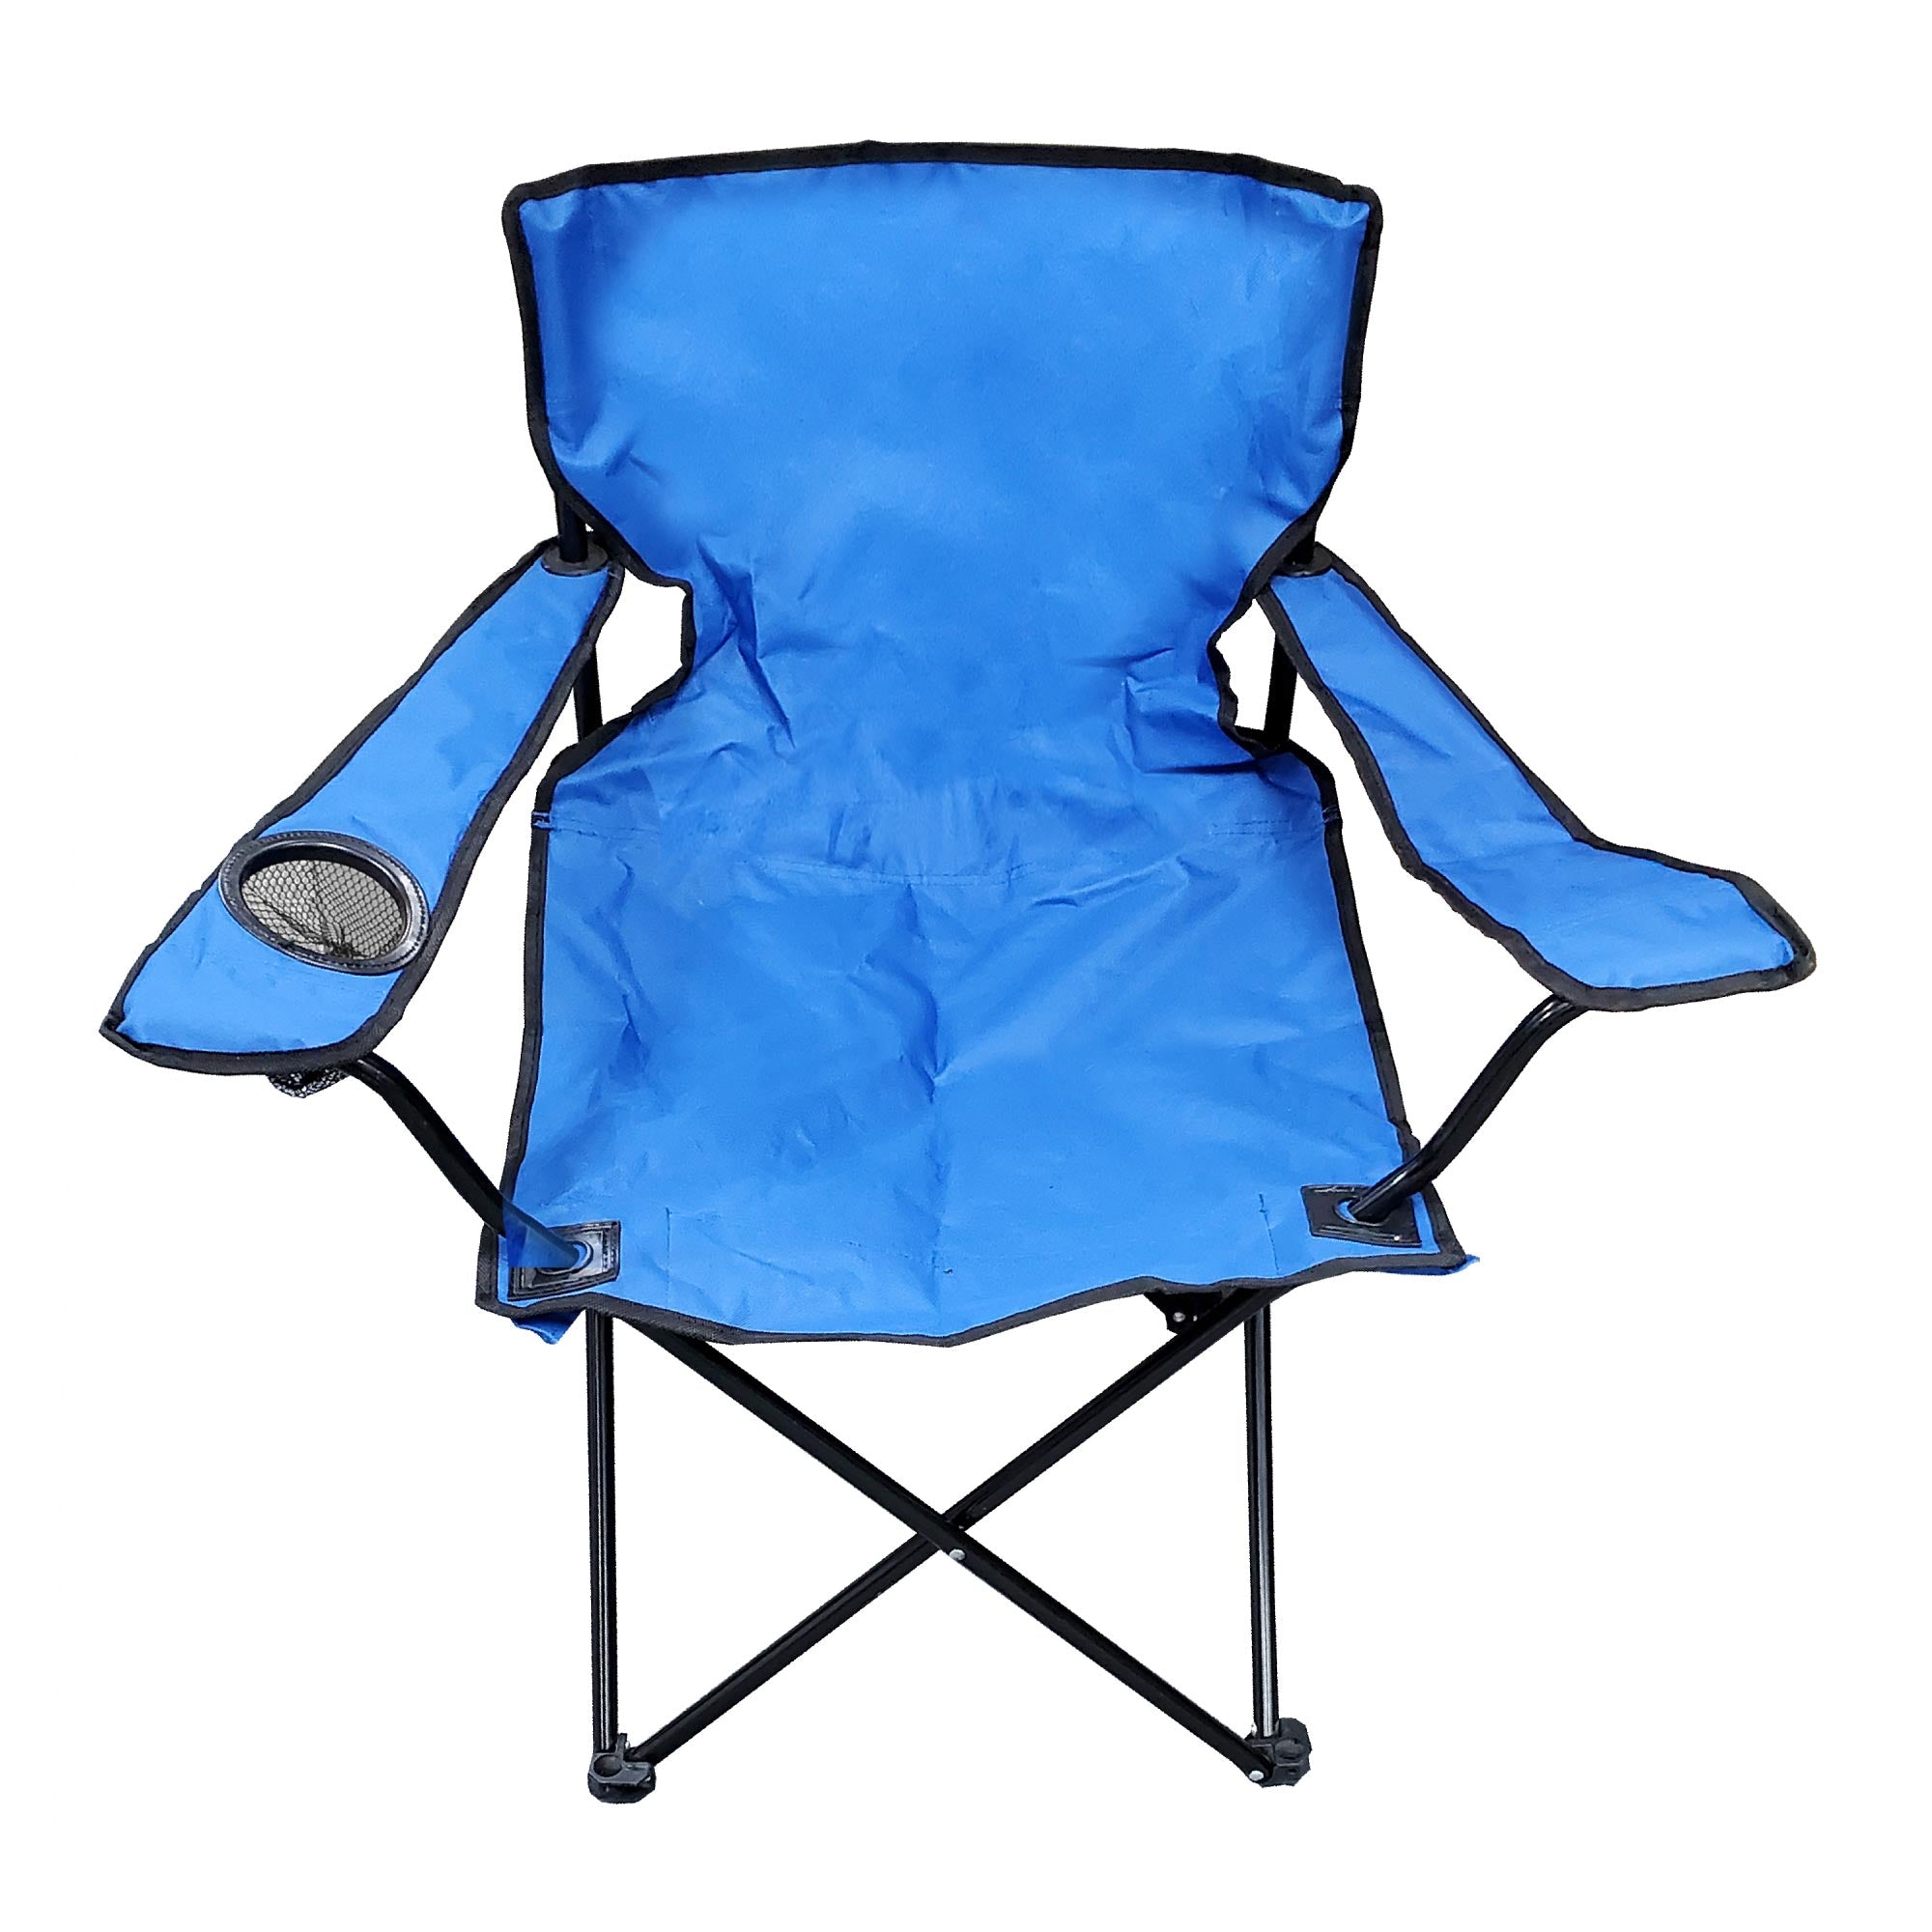 Steel Single Seat Camping Chair - Camping Chair - Camping Chairs Folding Lightweight - Camping Chair - Lightweight Camping Chair - Foldable Chair - Ca